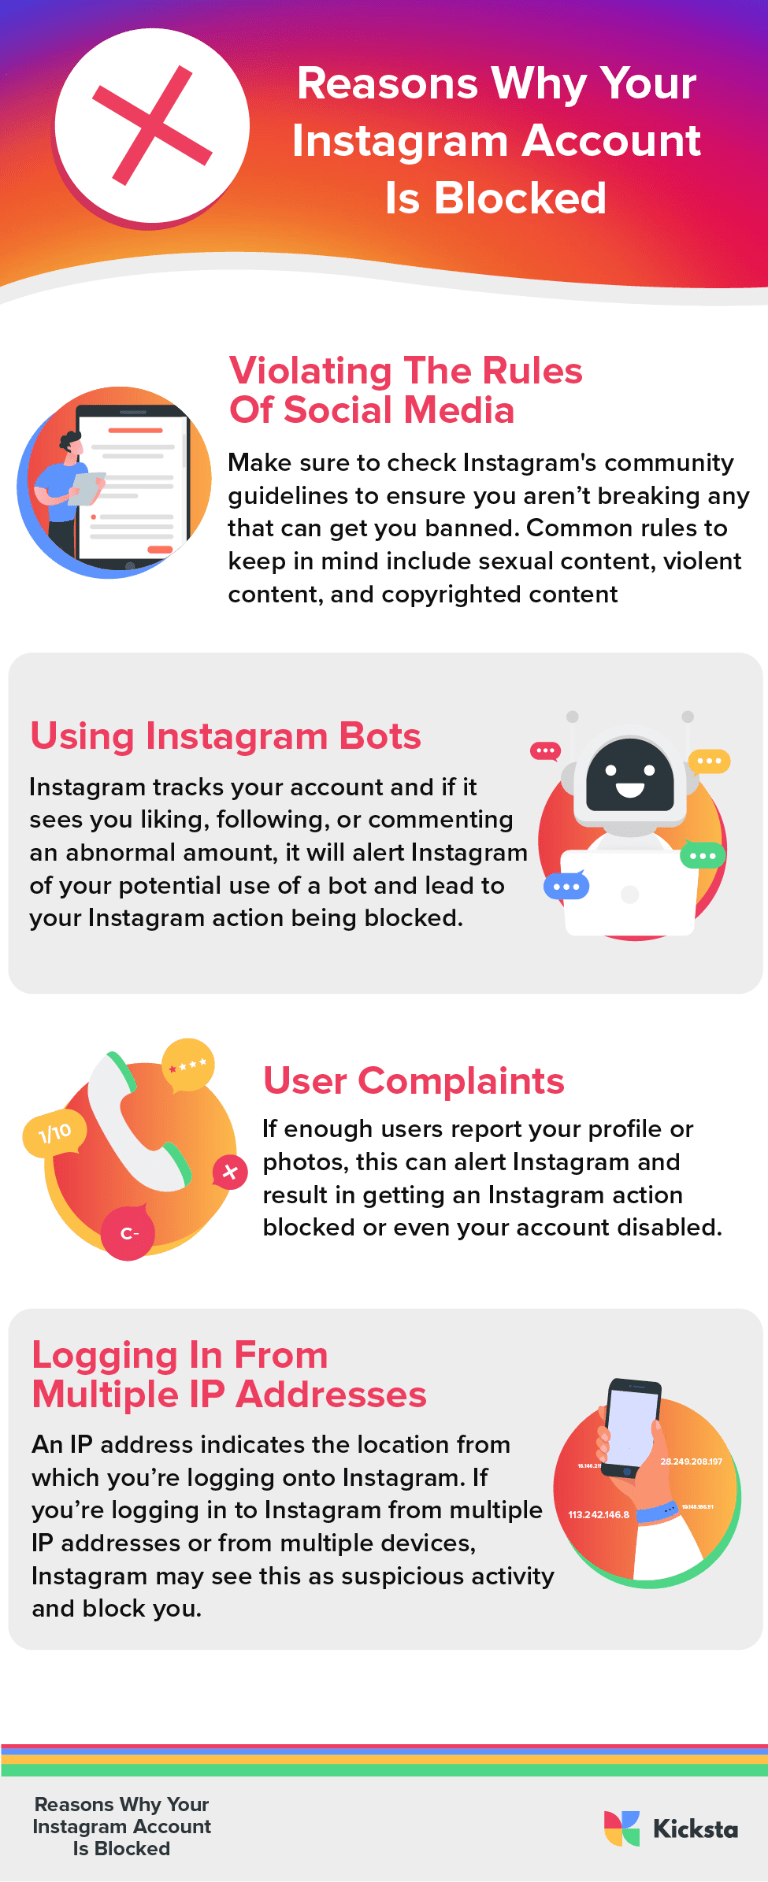 Reasons Why Your Instagram Account Is Blocked